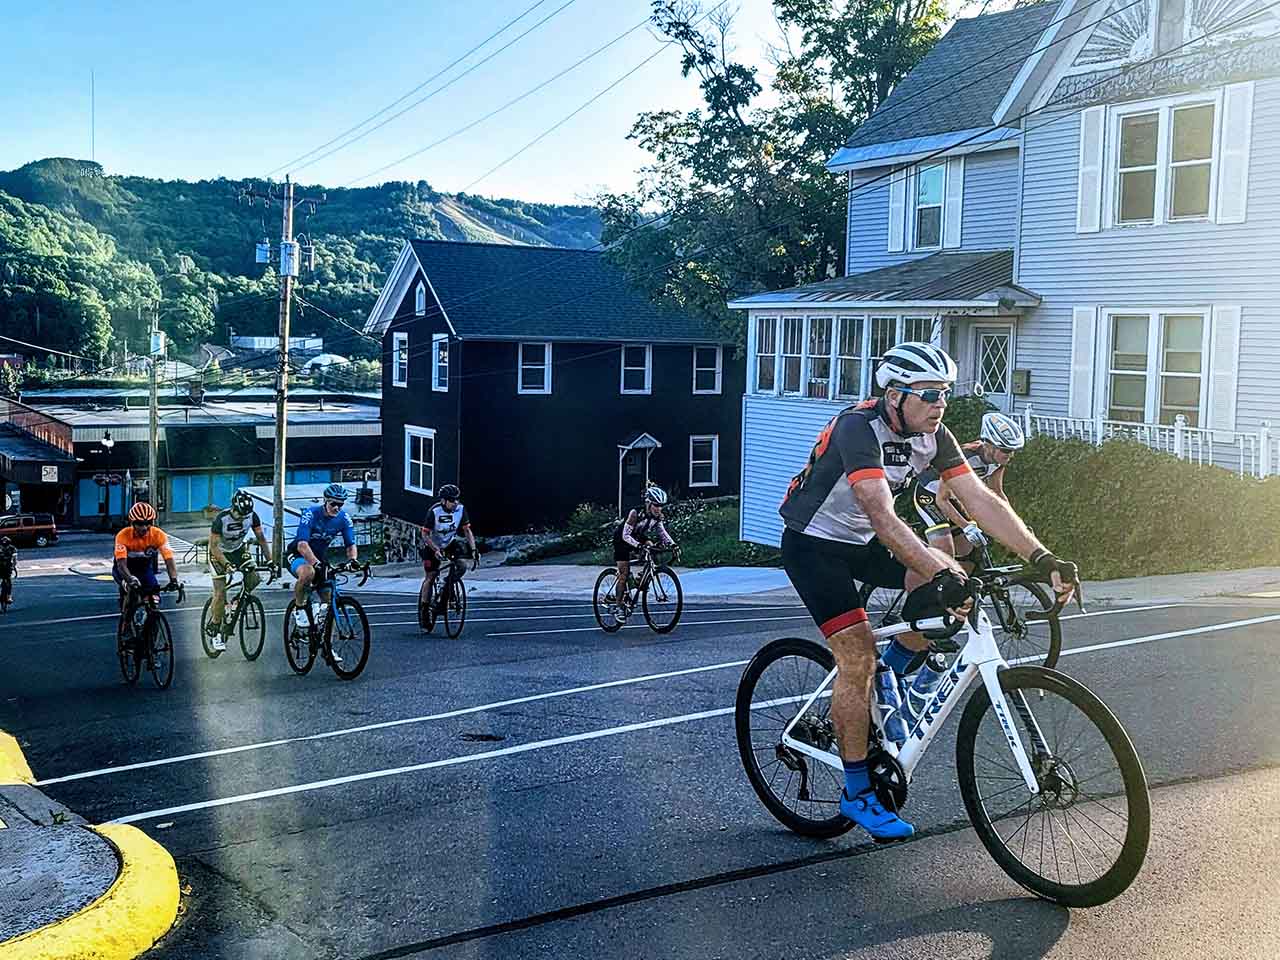 TDY cyclists ascending an uphill street in Houghton, MI.